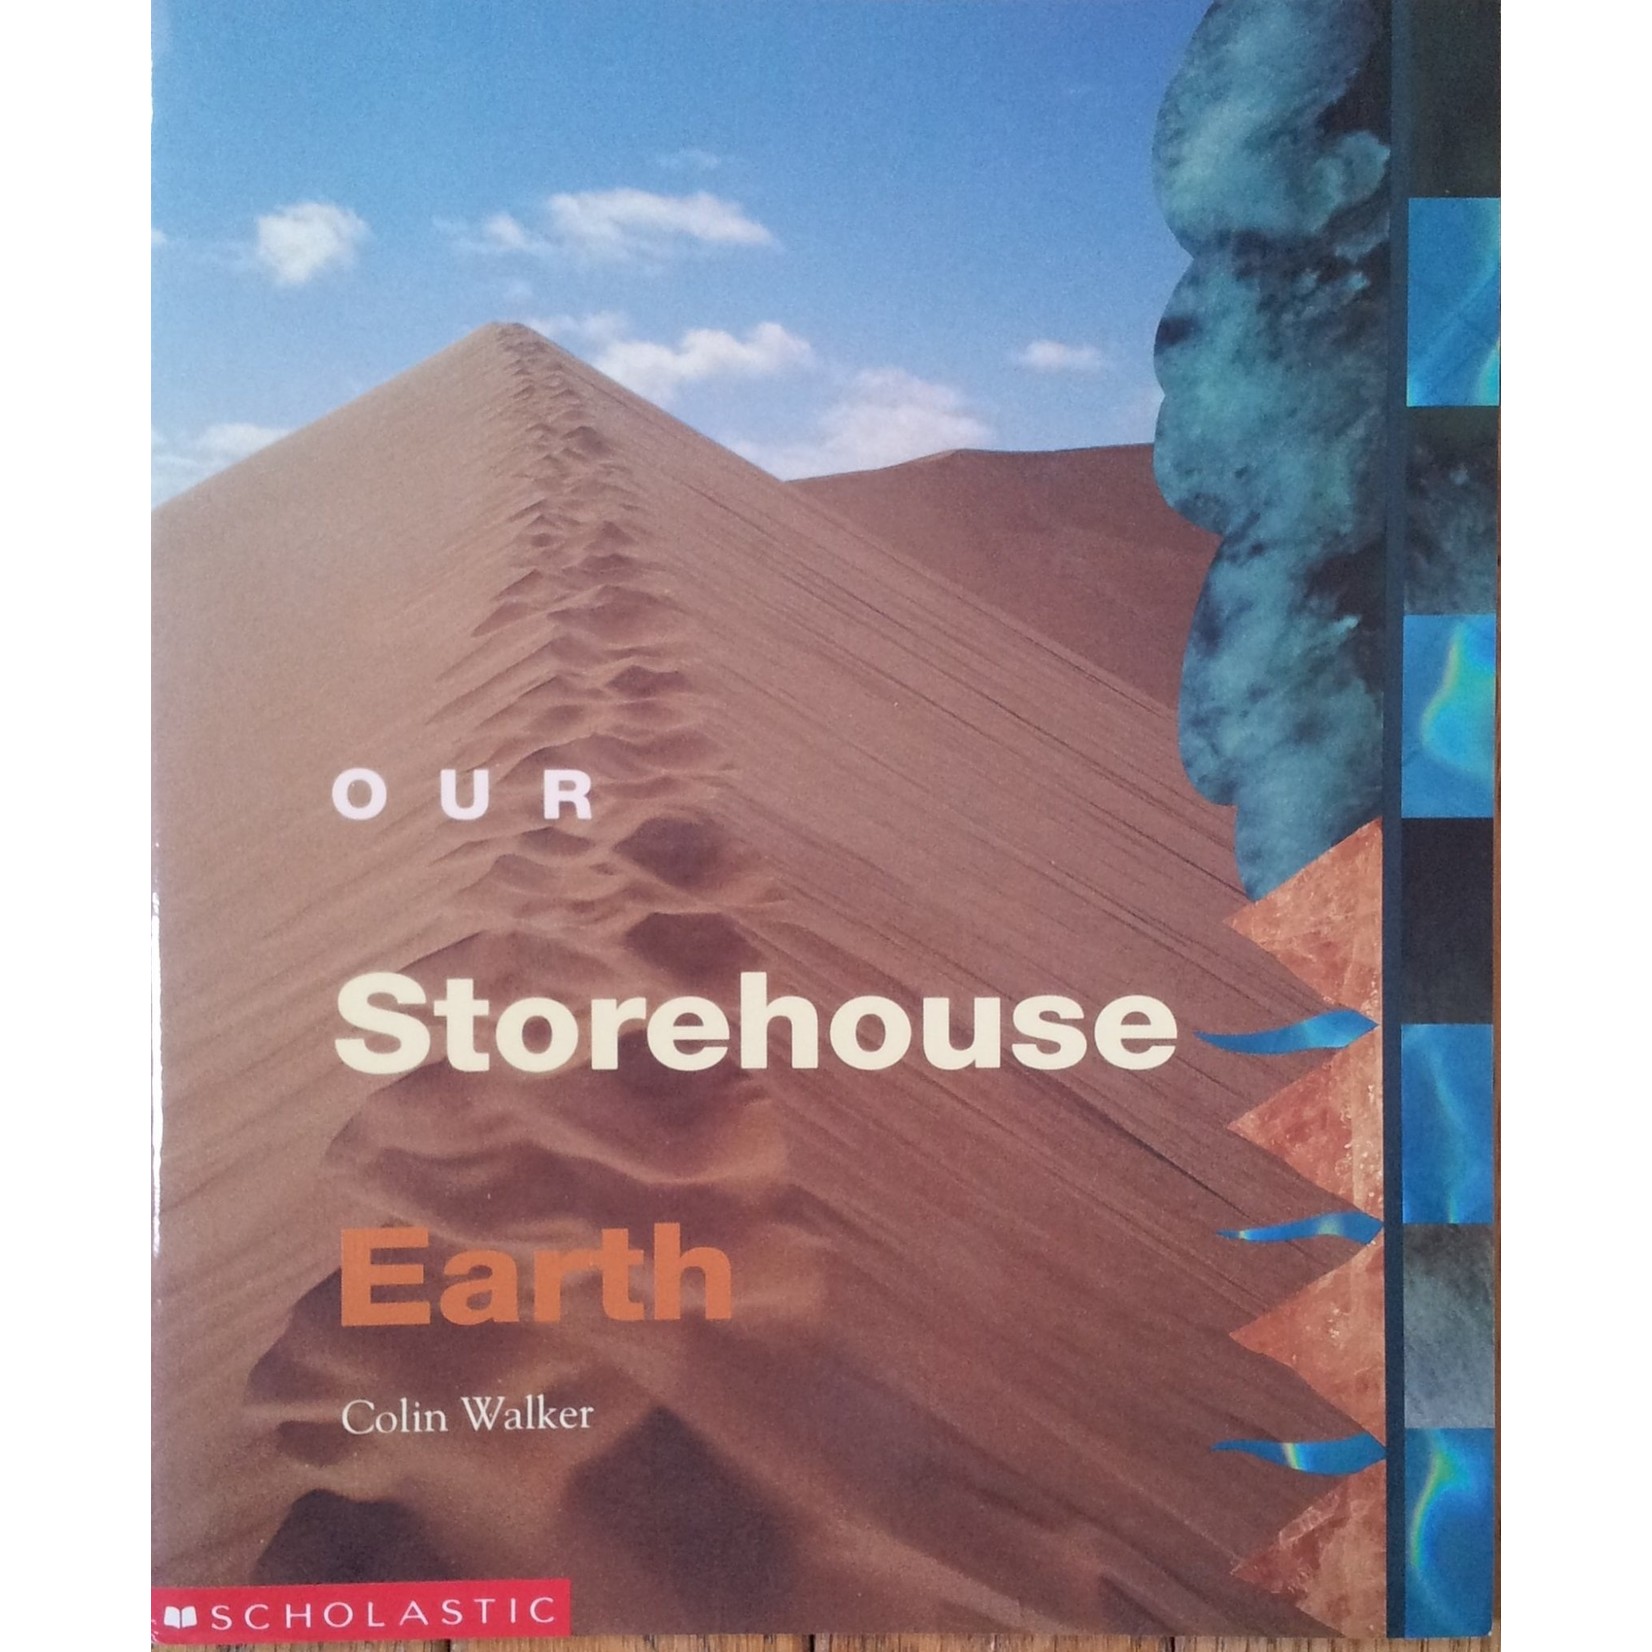 Our Storehouse Earth